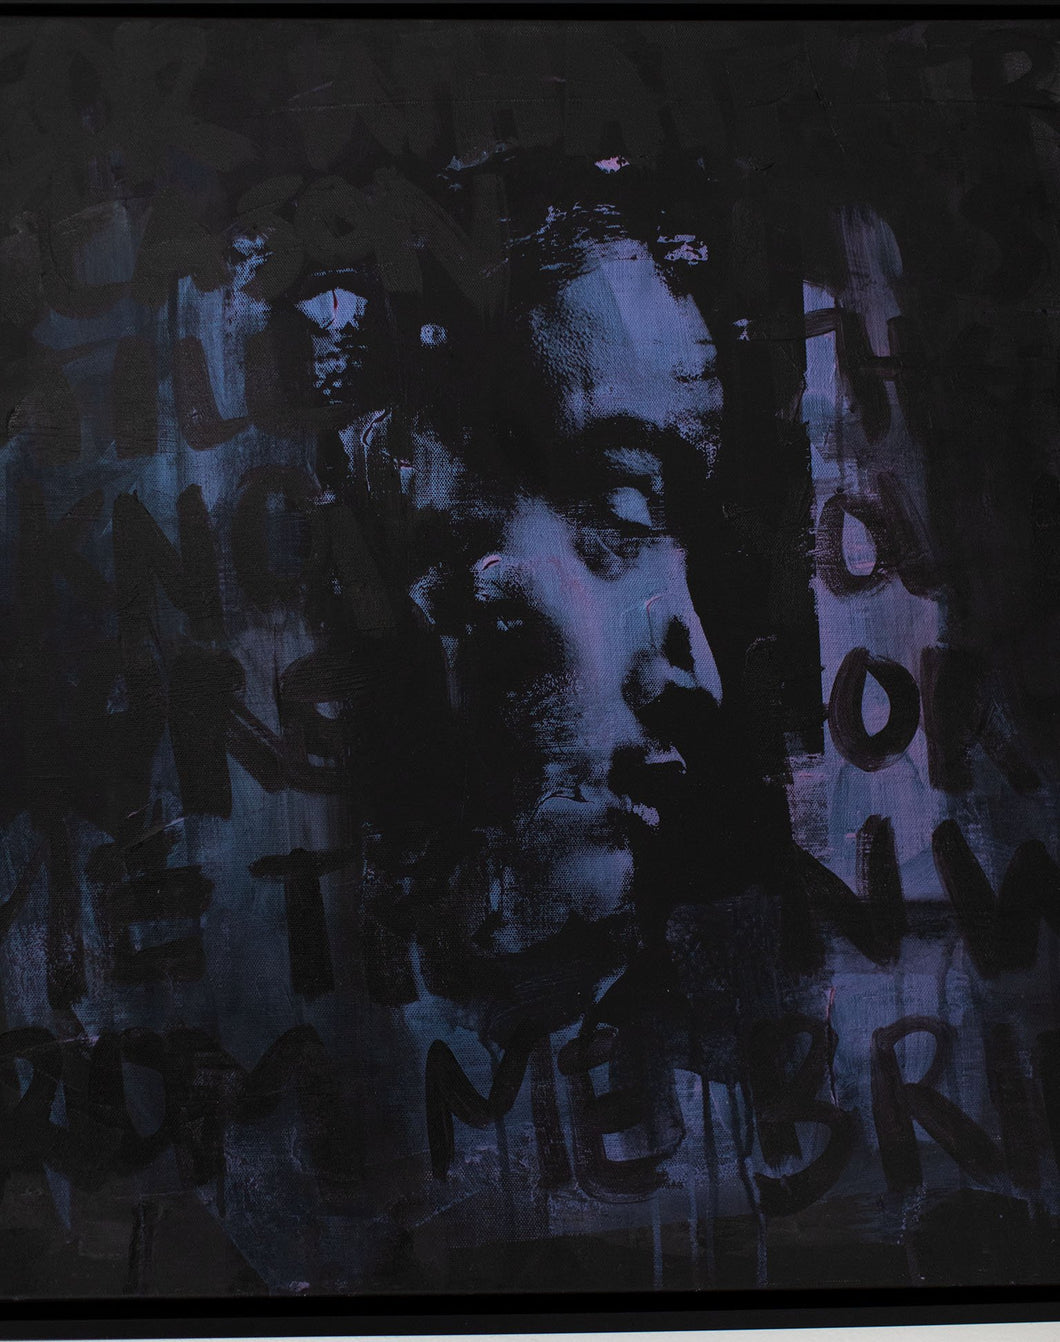 Street Art-Deep Blue, See?

Made from portrait photography turned into street art on canvas, 